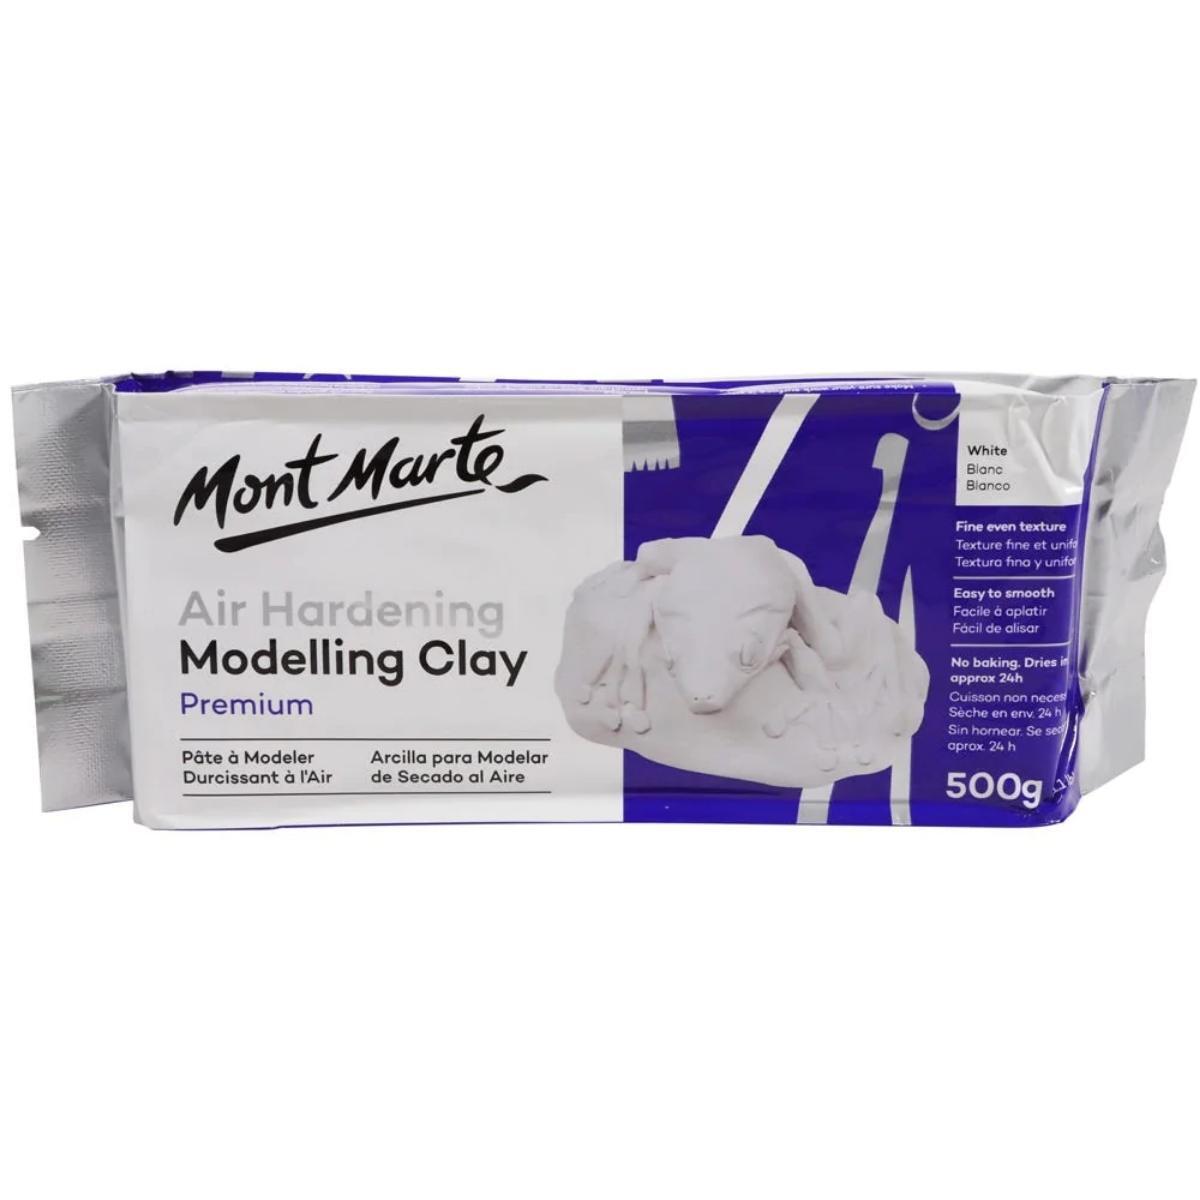 Mont Marte Air Hardening Modelling Clay 